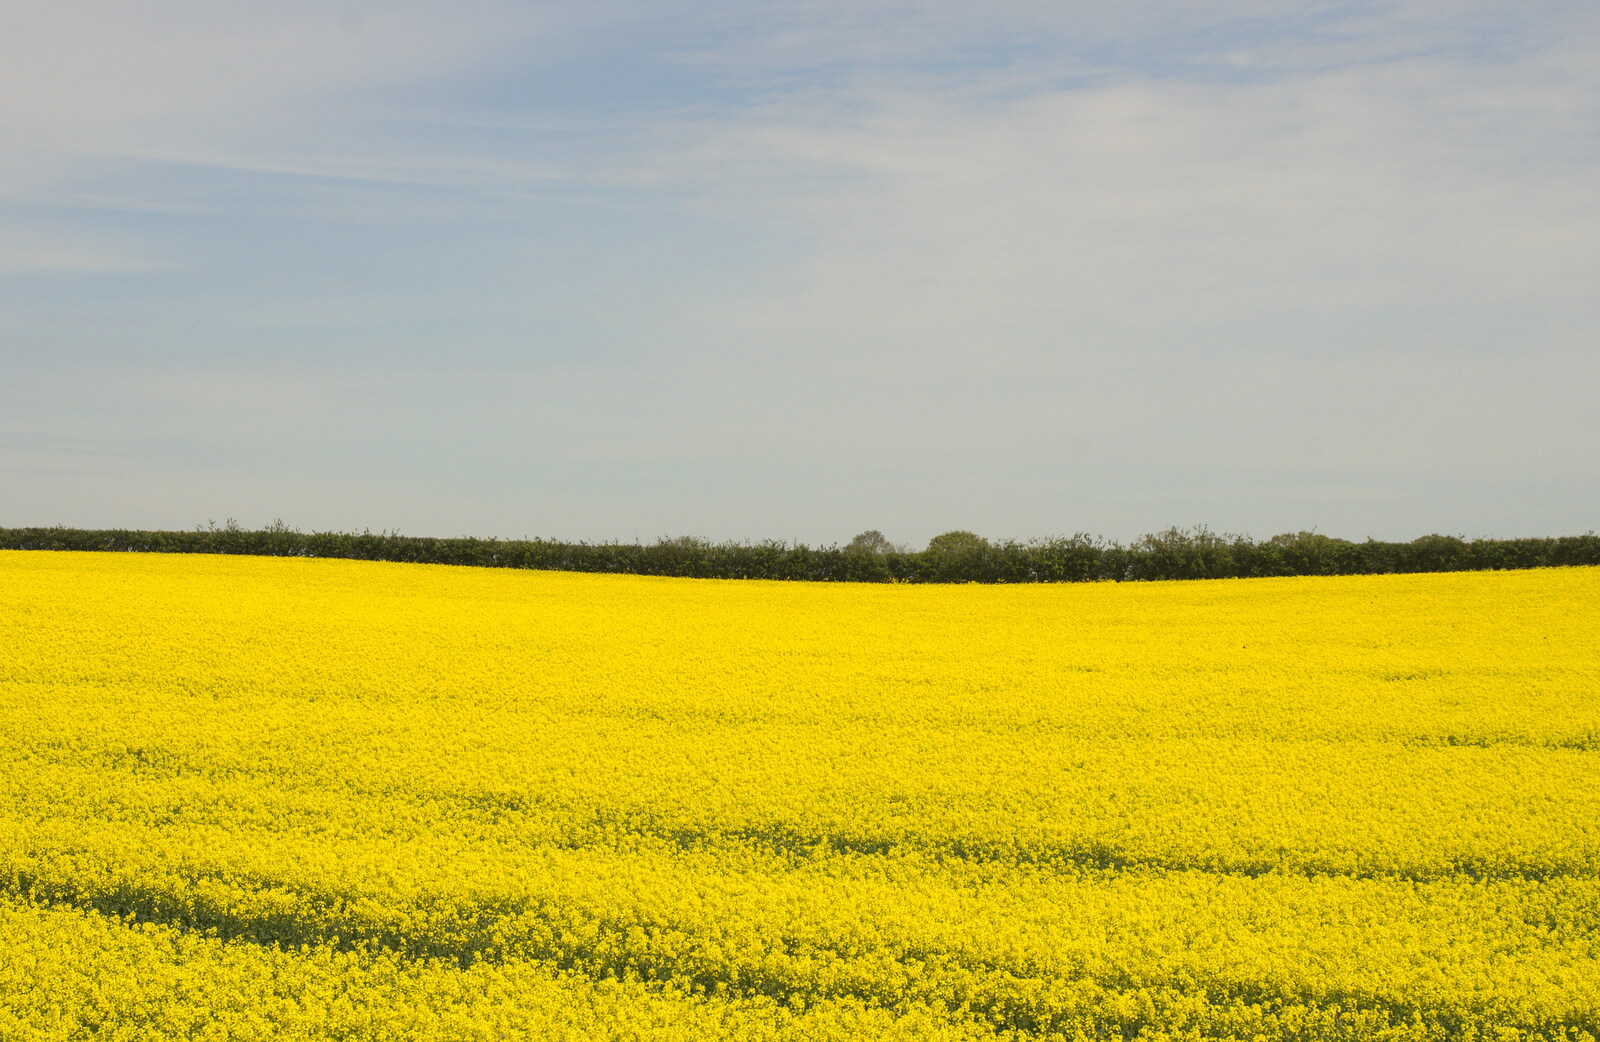 A yellow field of oilseed rape from The Bure Valley Railway, Aylsham, Norfolk - 26th May 2013